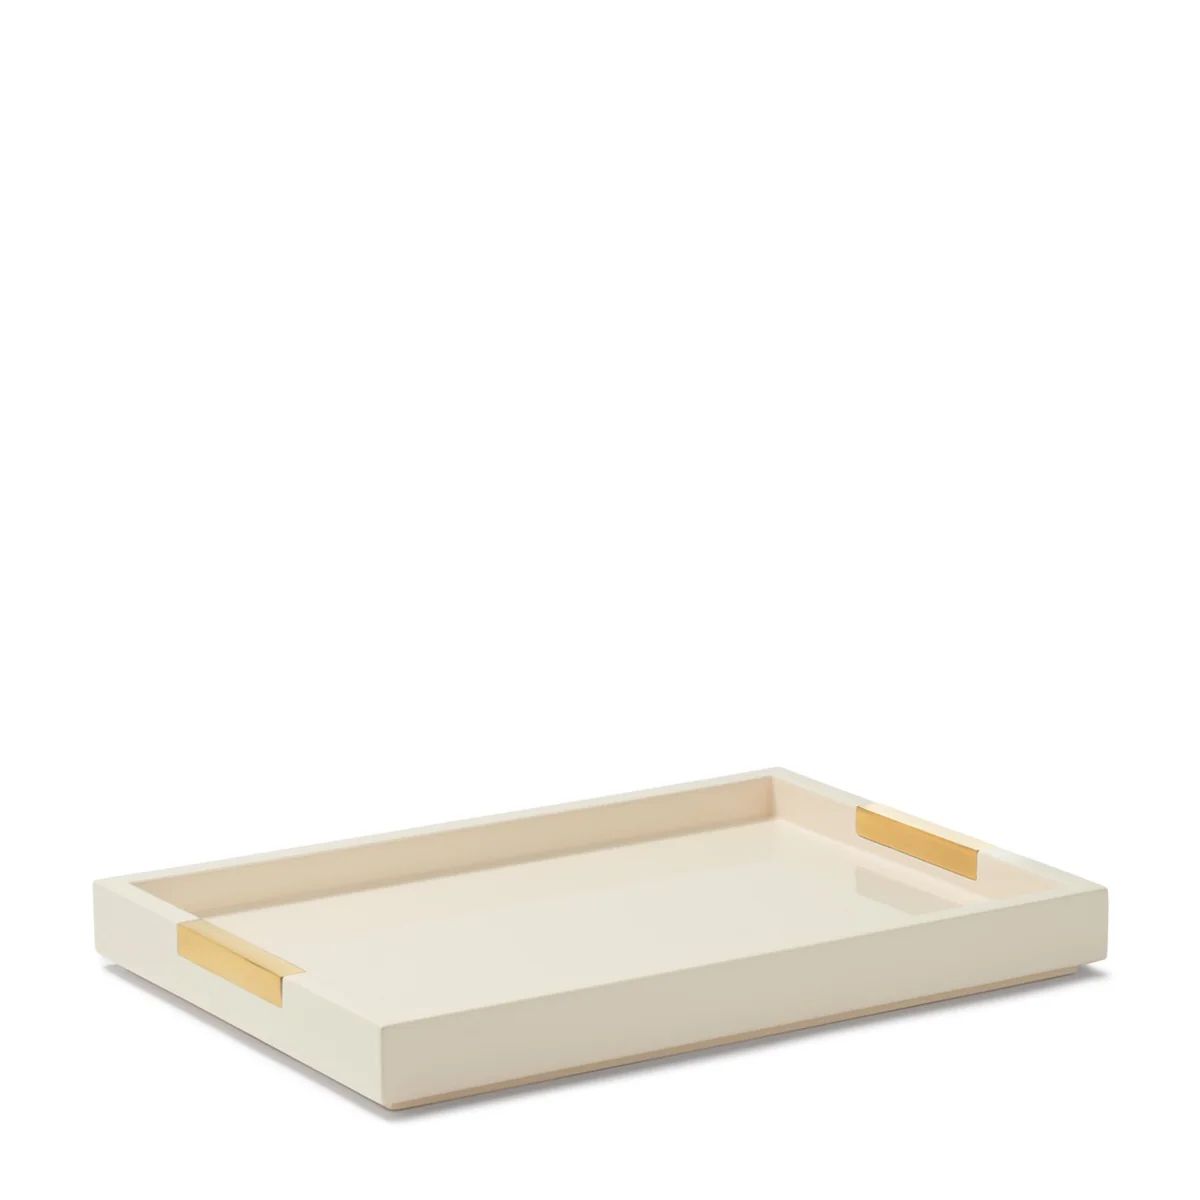 Piero Lacquer Vanity Tray in Cream, Large | Over The Moon